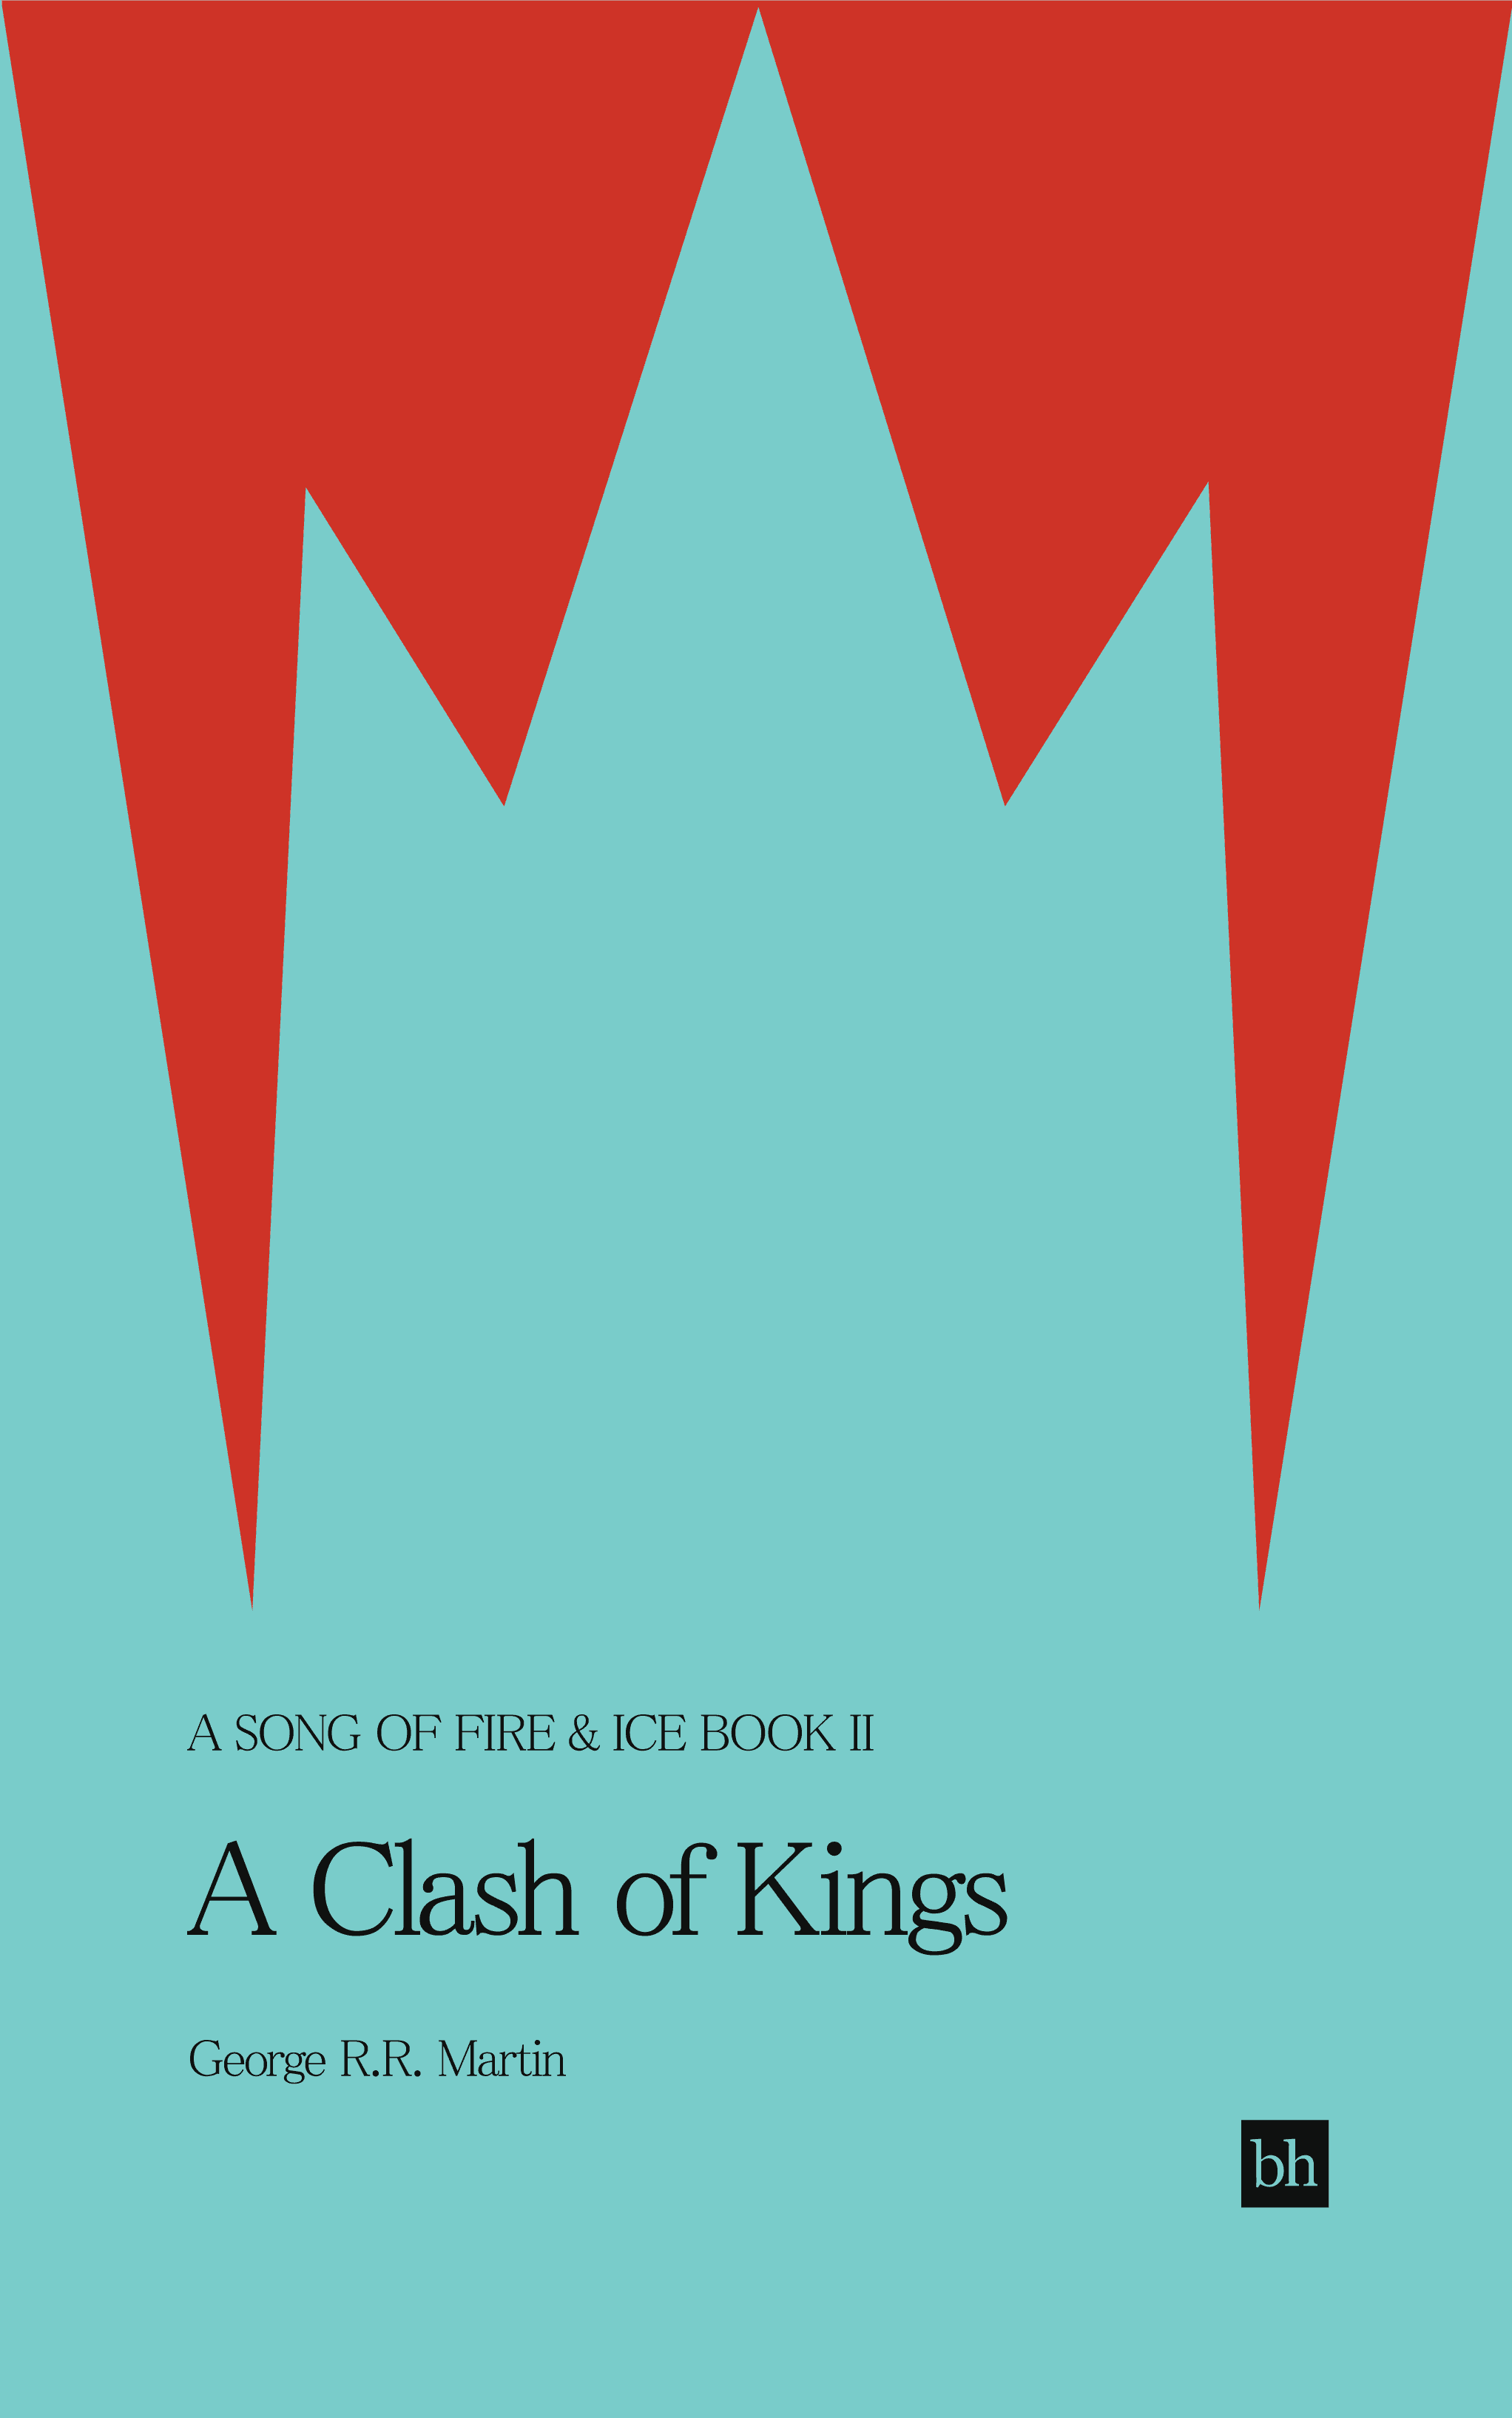 A Clash of Kings   by George R.R. Martin 